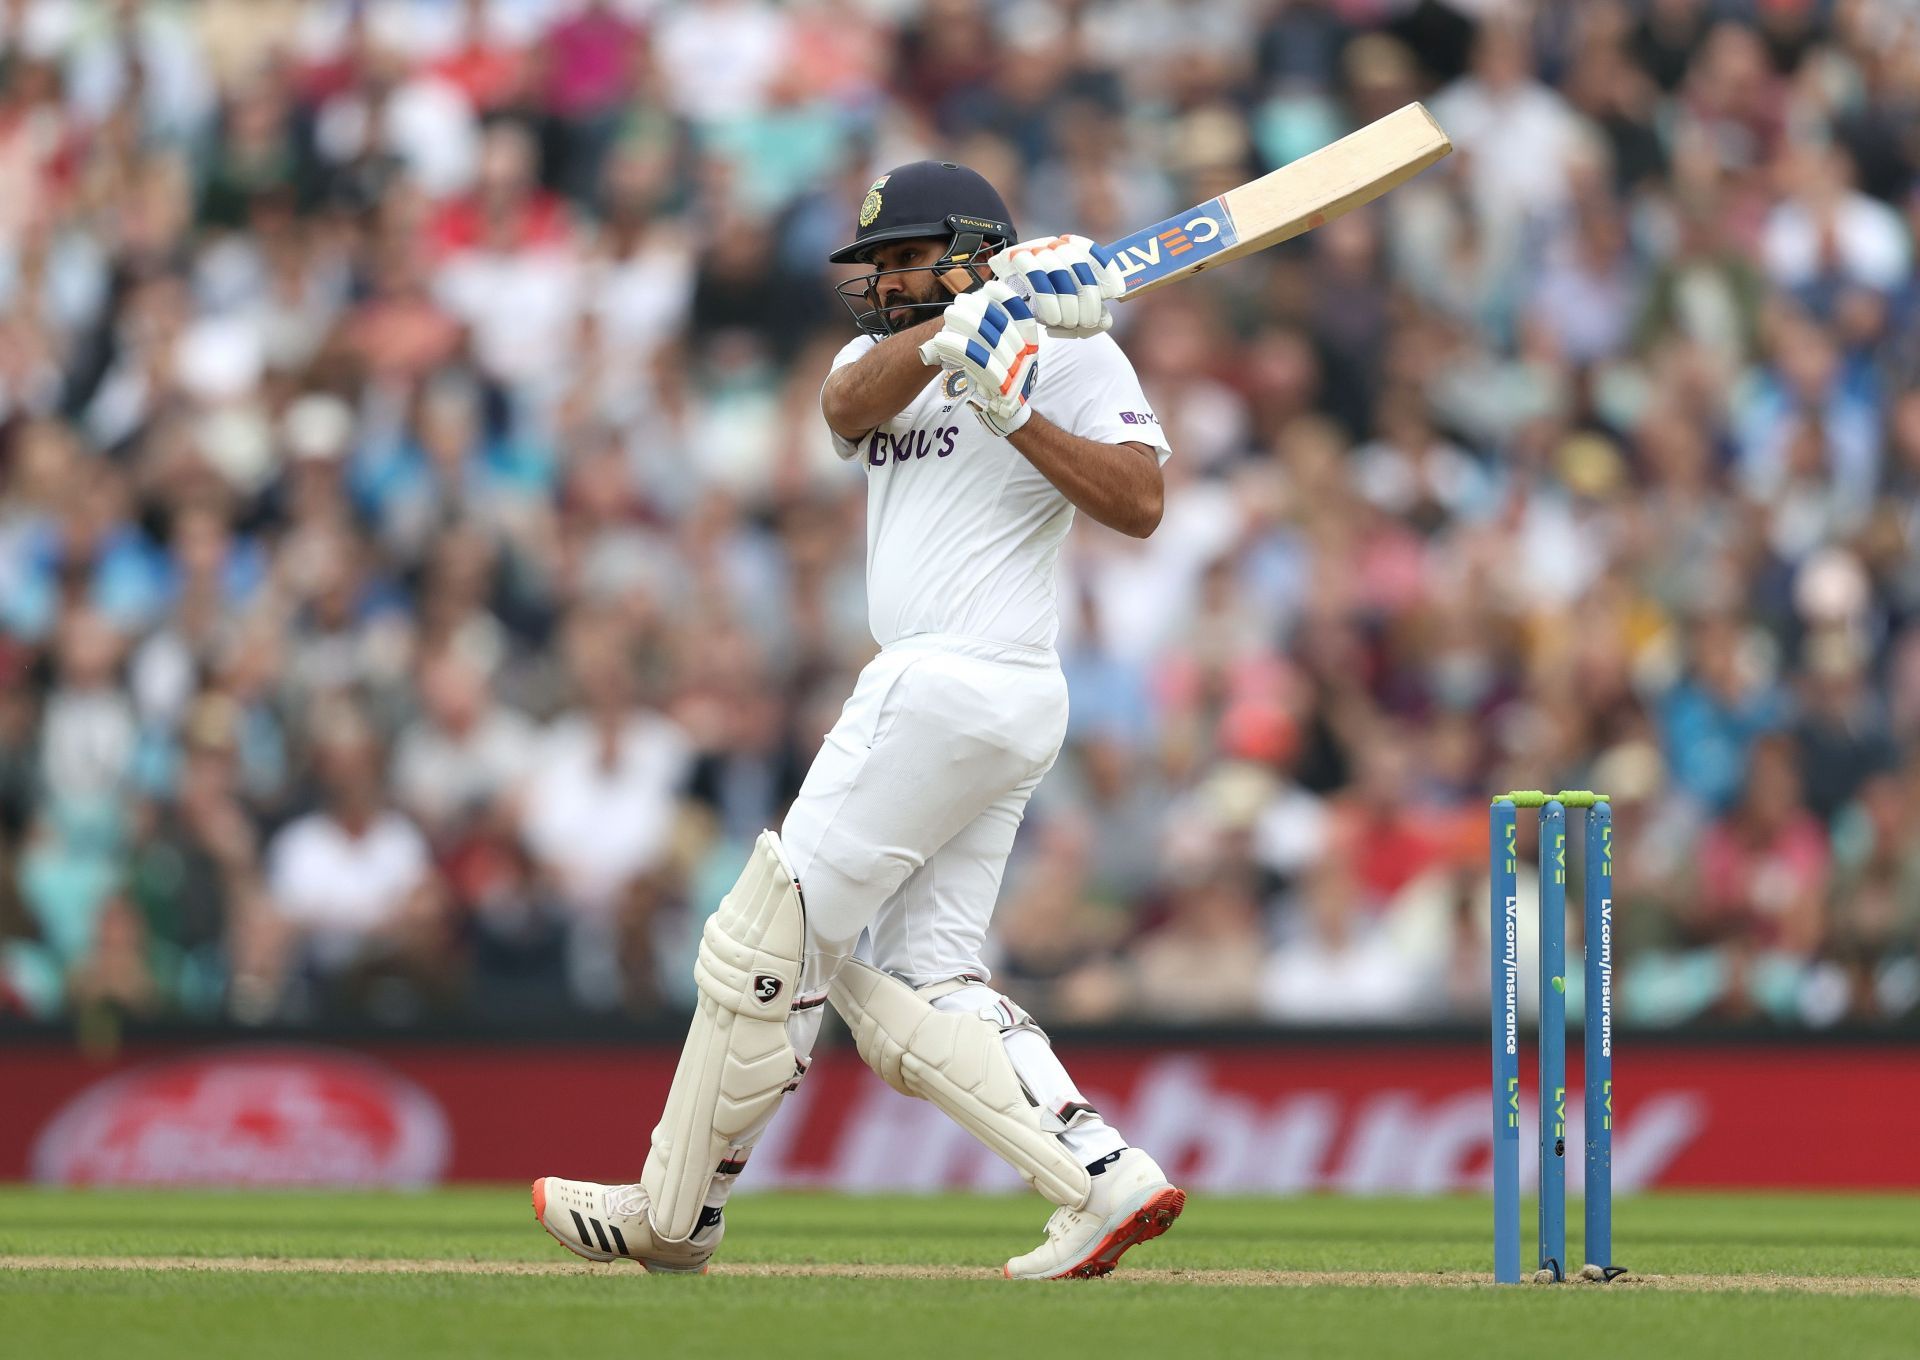 Aakash Chopra highlighted that 2021 has been the defining year for Rohit Sharma in Test cricket